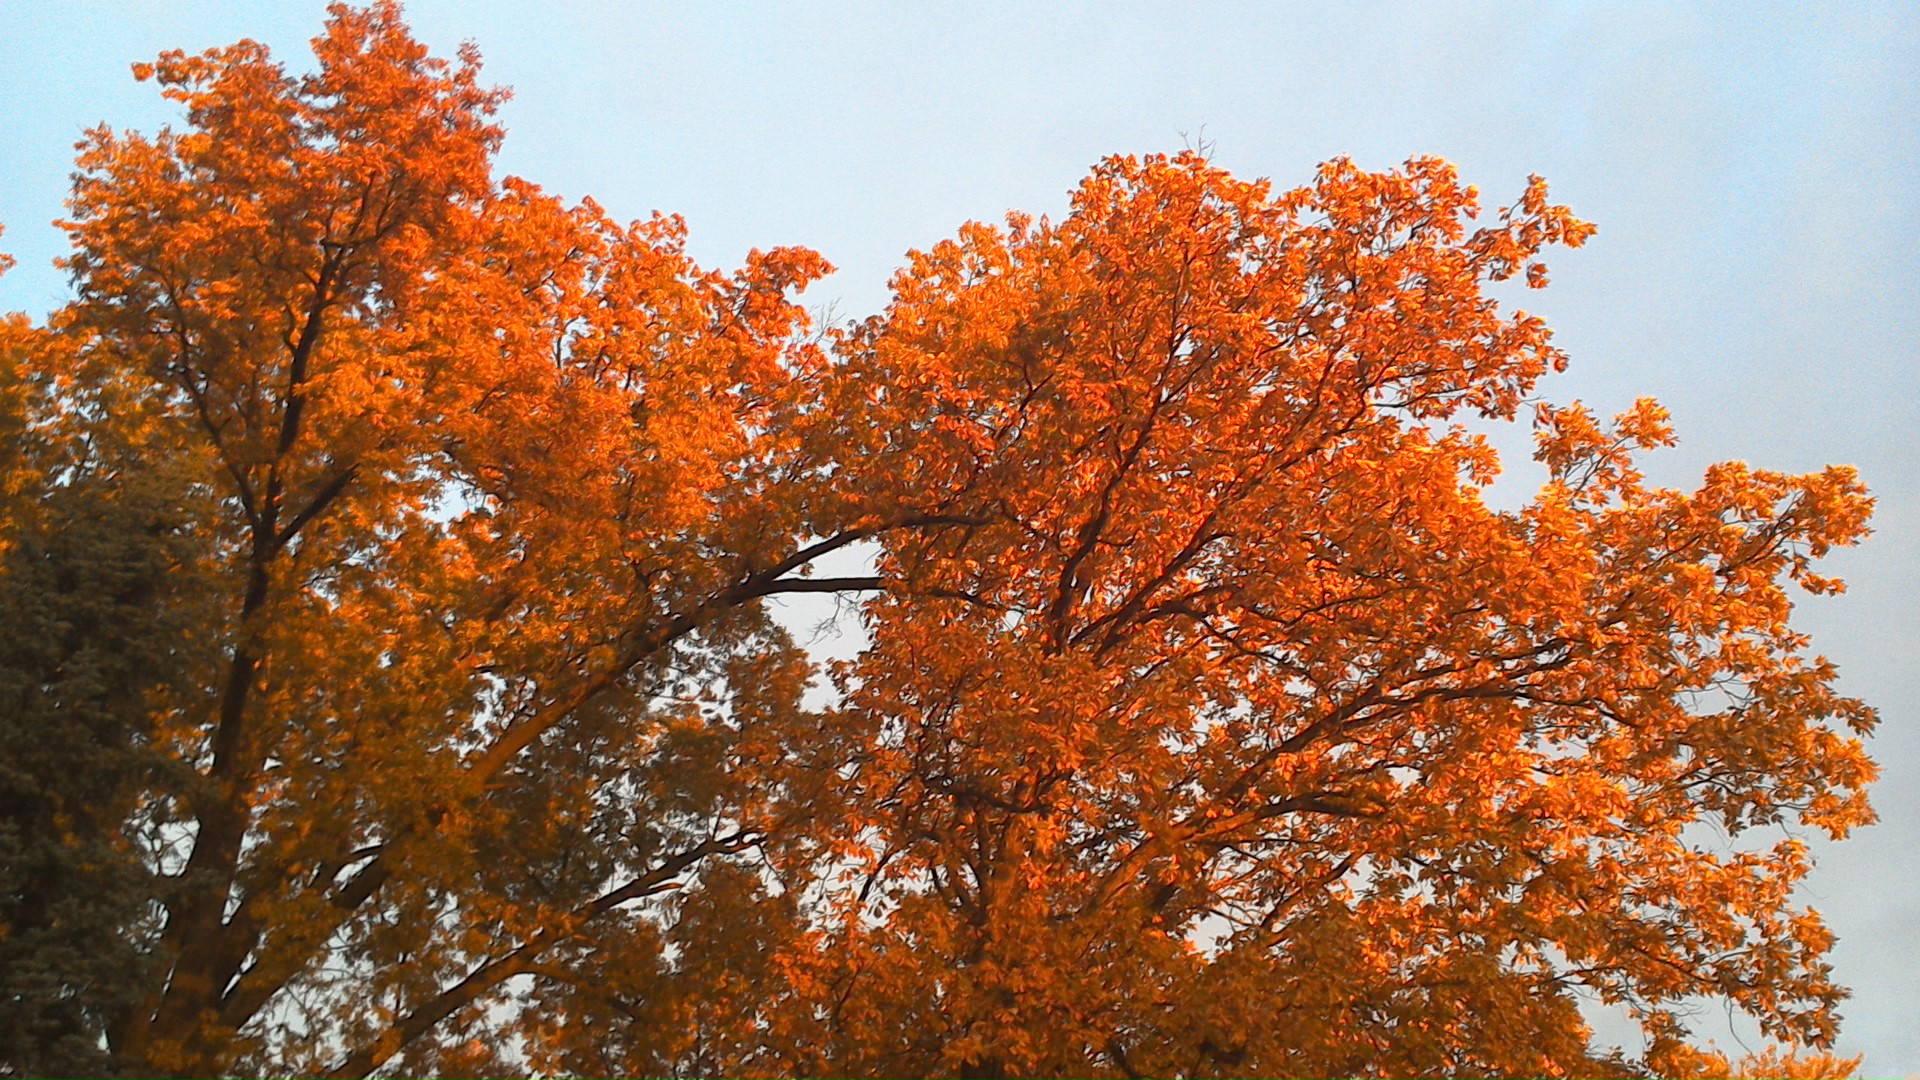 Fall colors - 11.6.2013 - p1 by V3DT - Visual 3D Technology